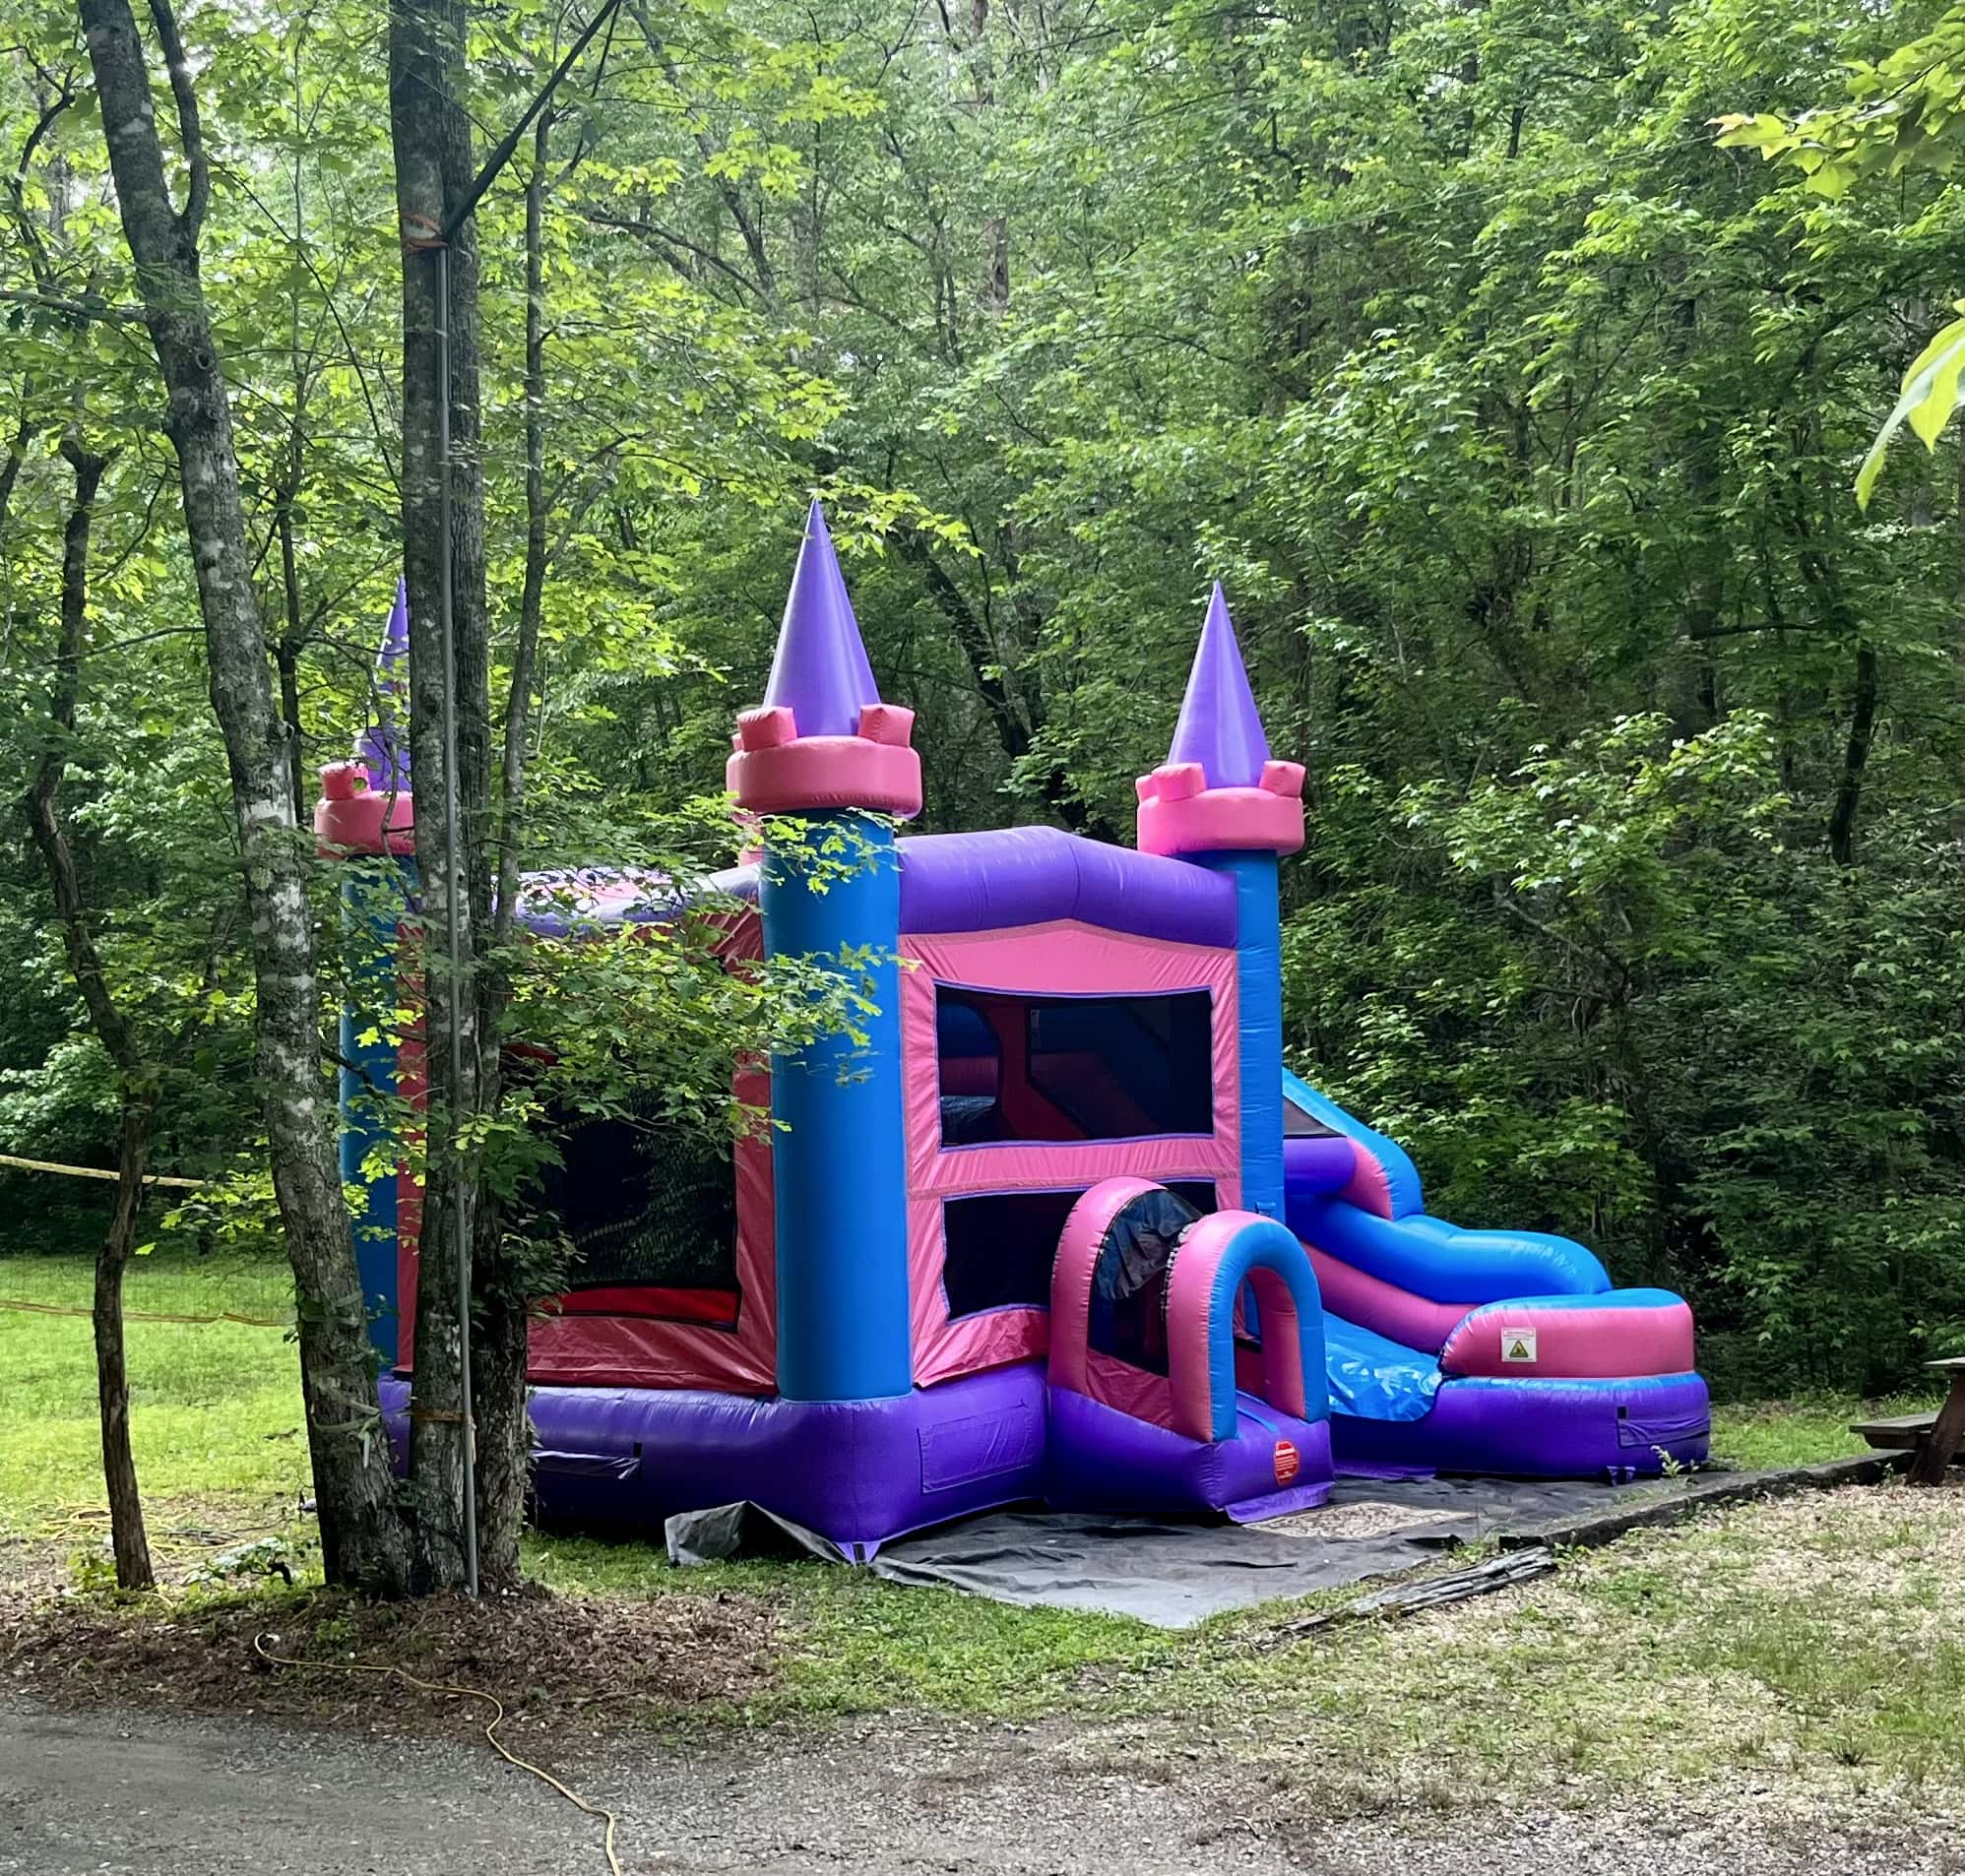 Just-A-Jumpin Inflatable Rentals and Events - Cleveland, GA, US, rental bounce house